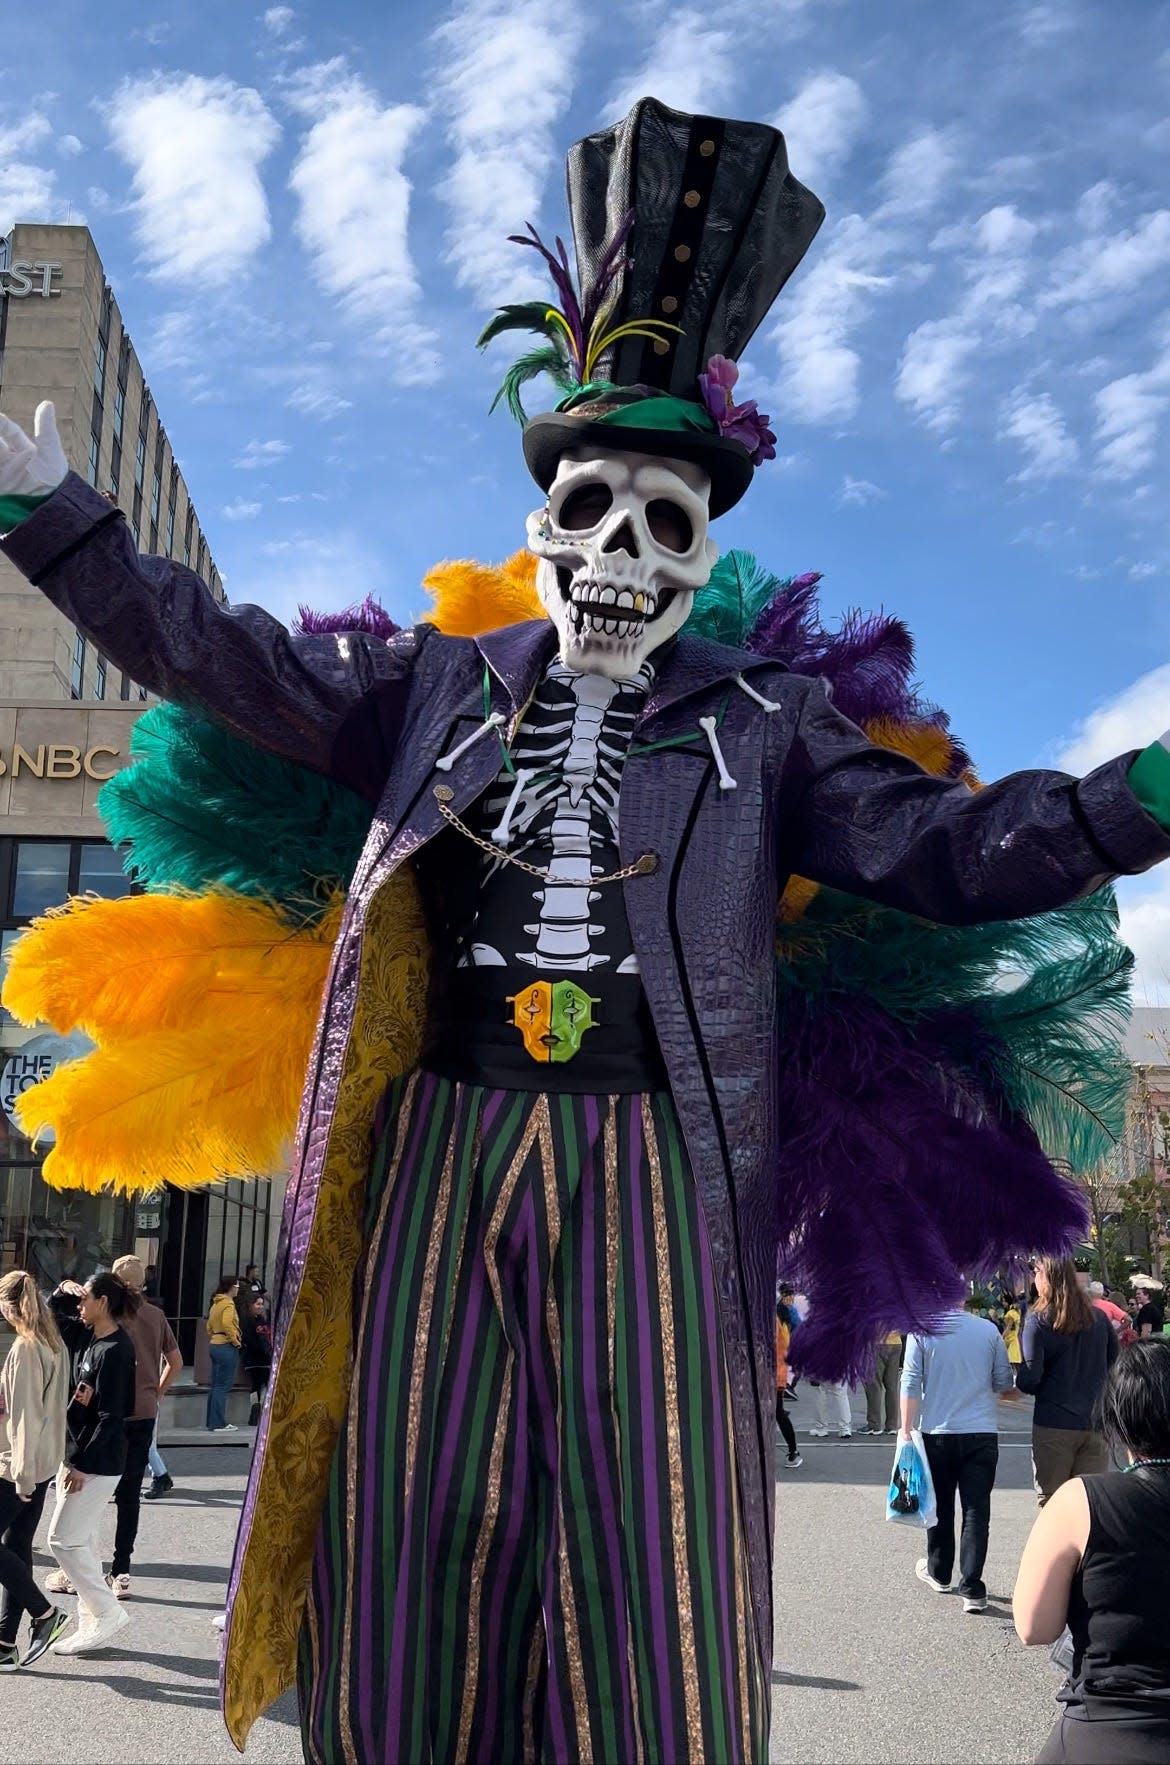 Lora Sauls said the parade performers, who are cast around November, come from all walks of life, from professional dancers to past Halloween Horror Nights scareactors to people who've never performed before.